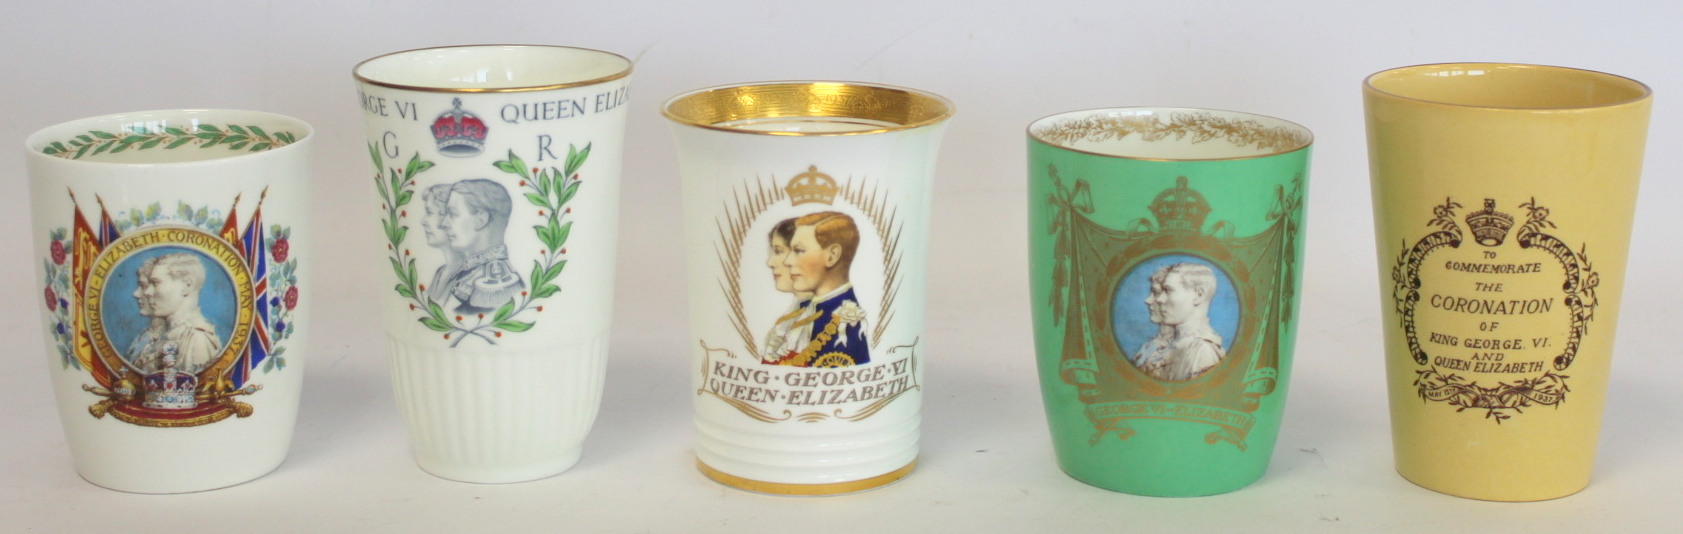 Minton limited edition commemorative beaker for the Coronation of George VI and Queen Elizabeth